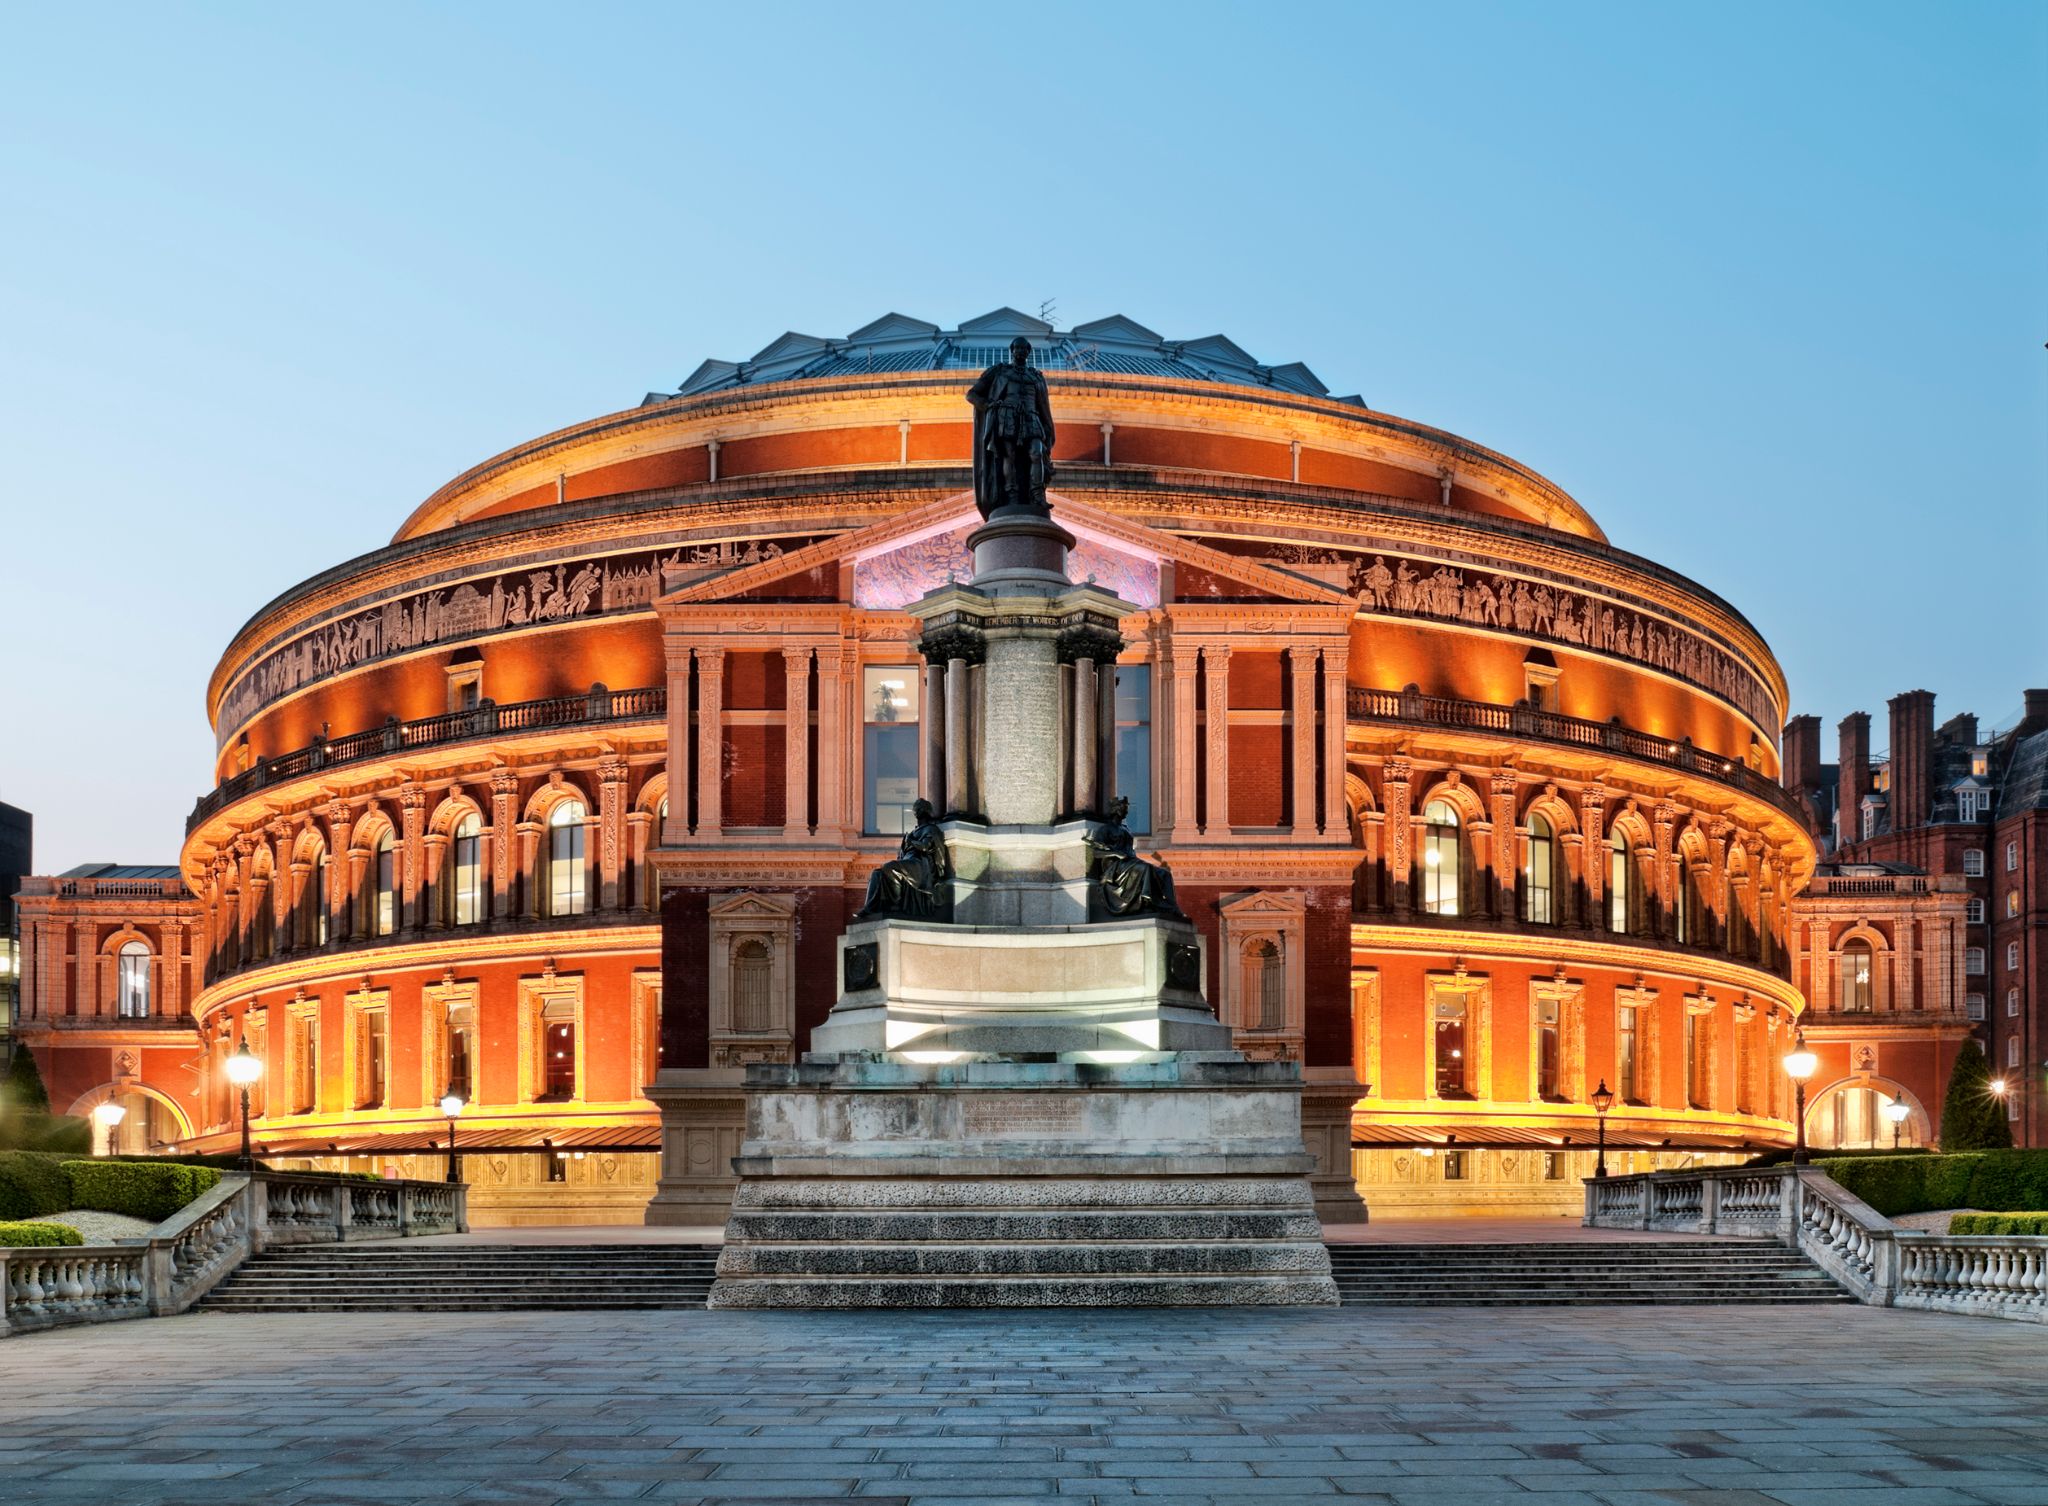 ESG secures Compliance Consultancy Agreement with Royal Albert Hall